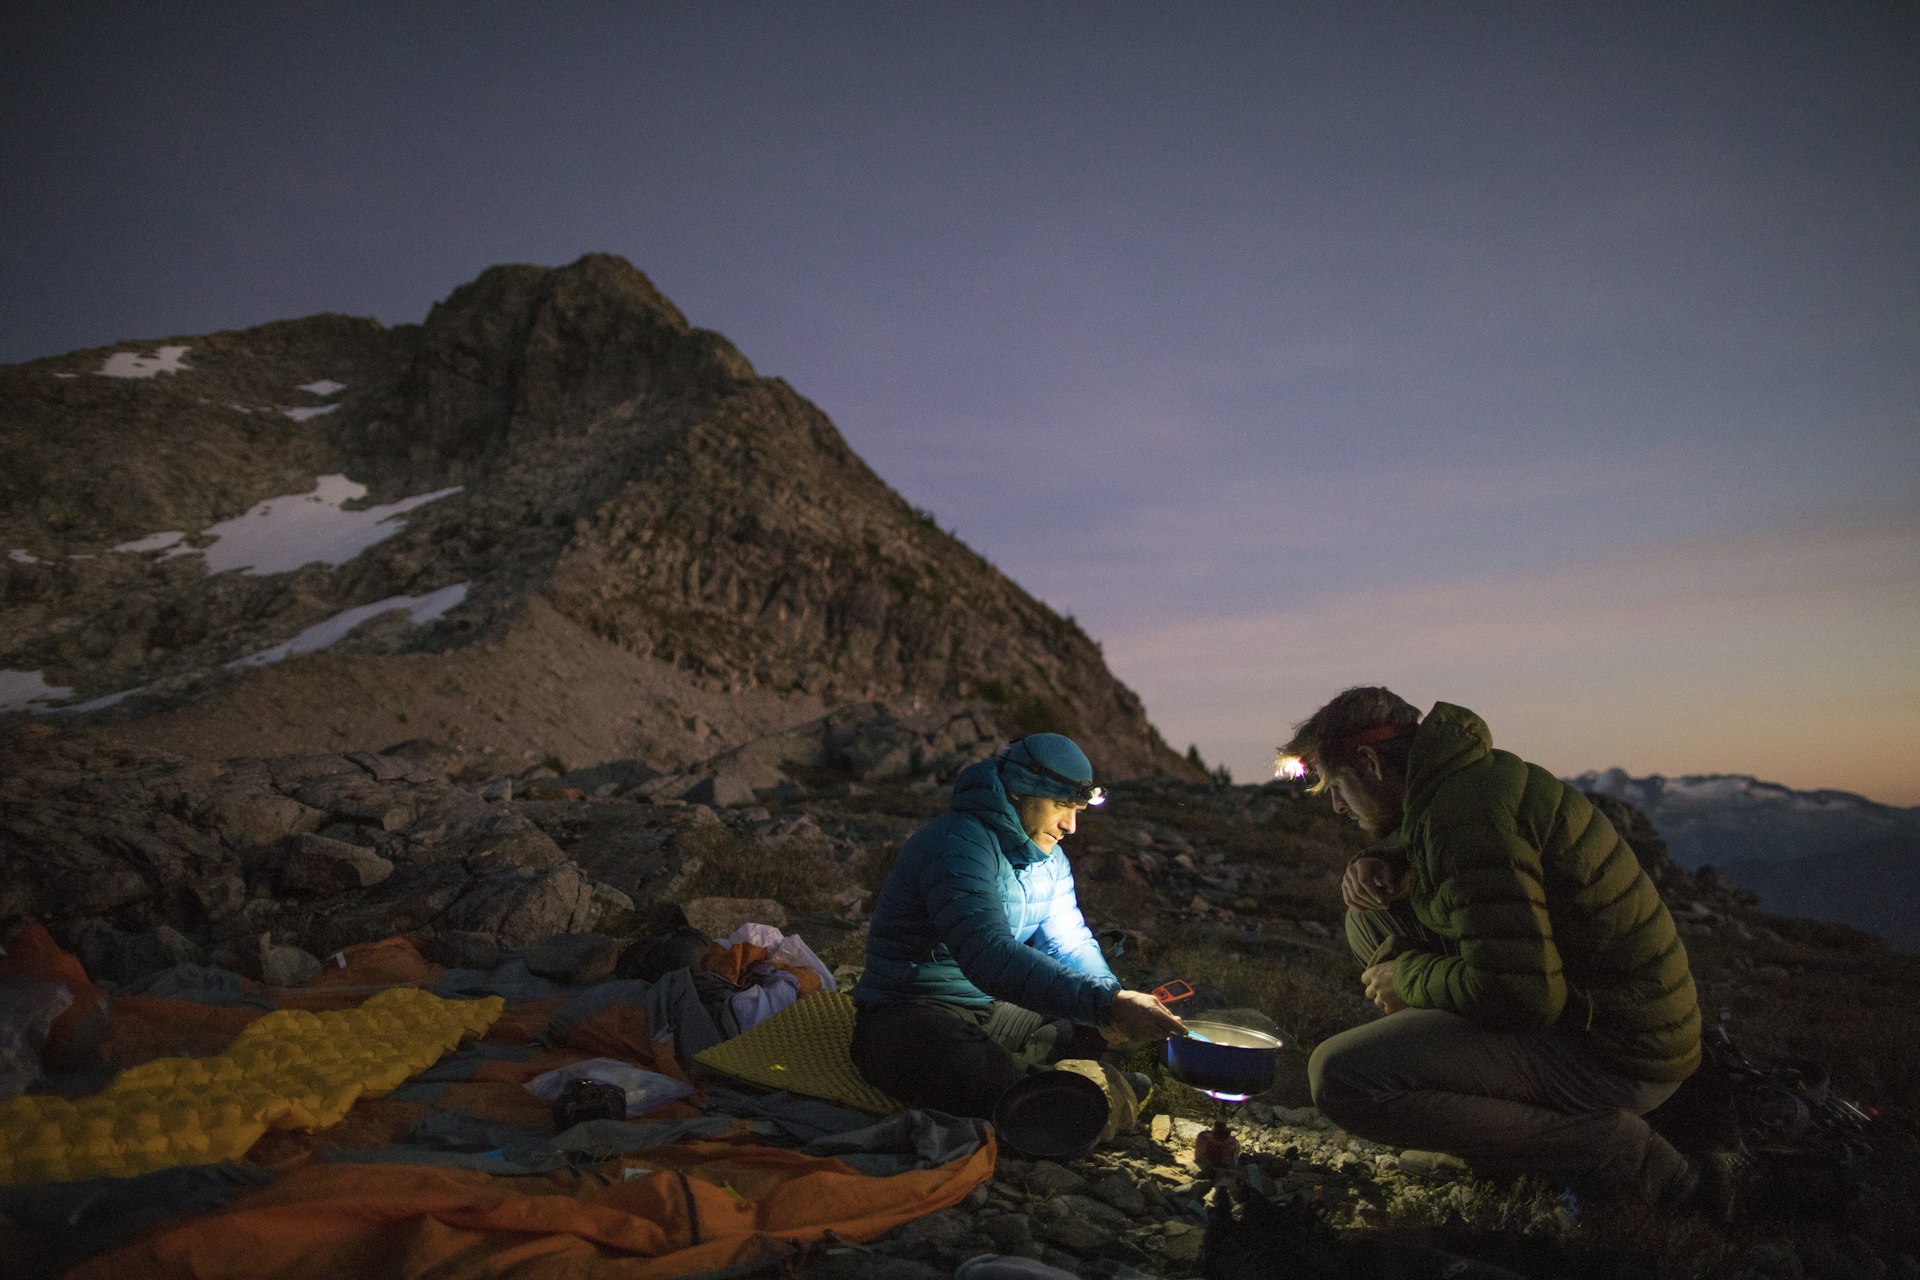 Mountaineers cooking on a camp stove and using headlamps after sunset